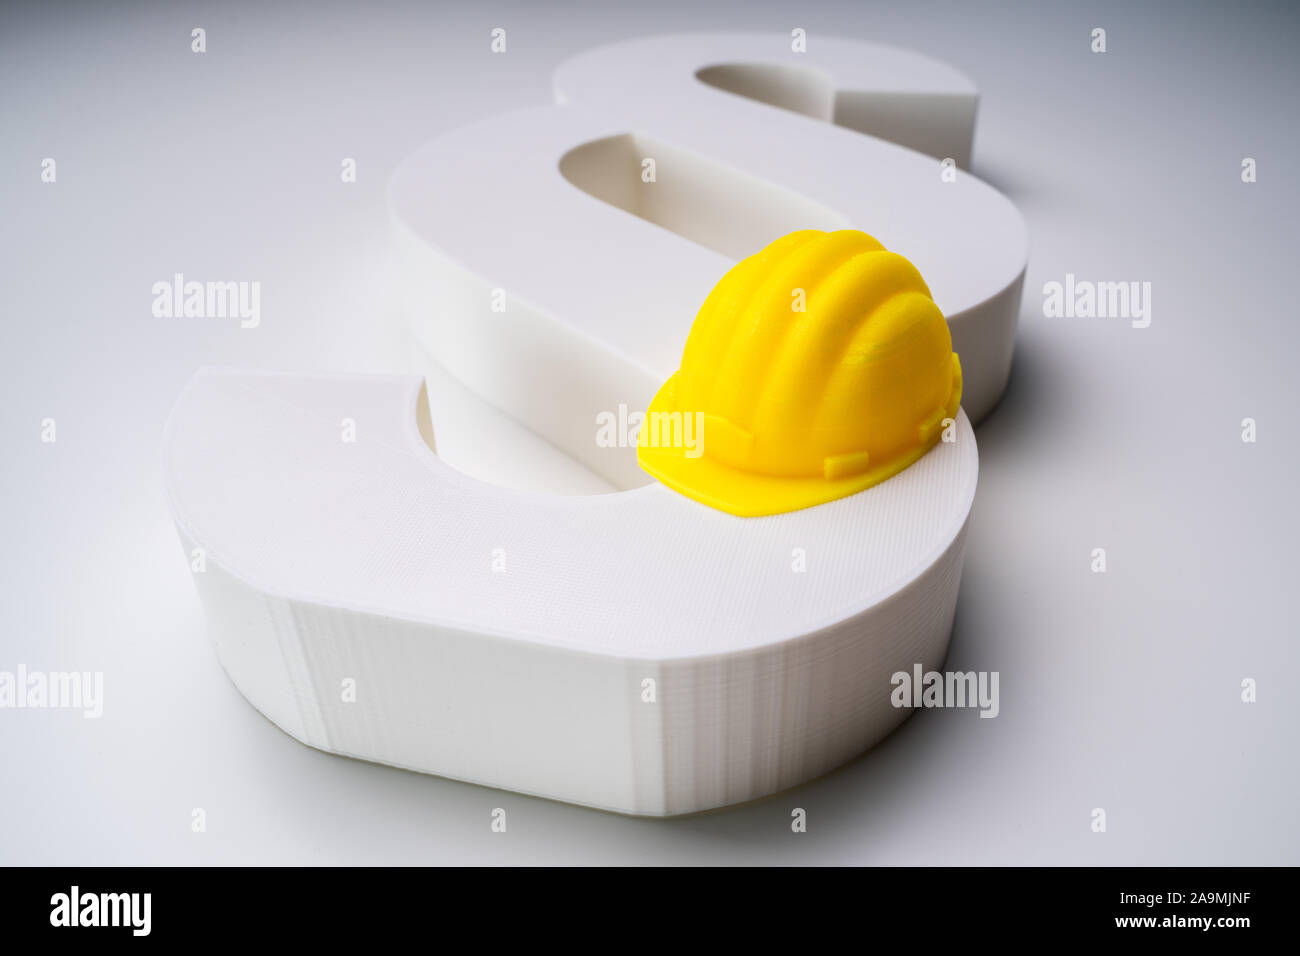 Elevated View Of Yellow Hard Hat Model And White Paragraph Symbol On White Surface Stock Photo